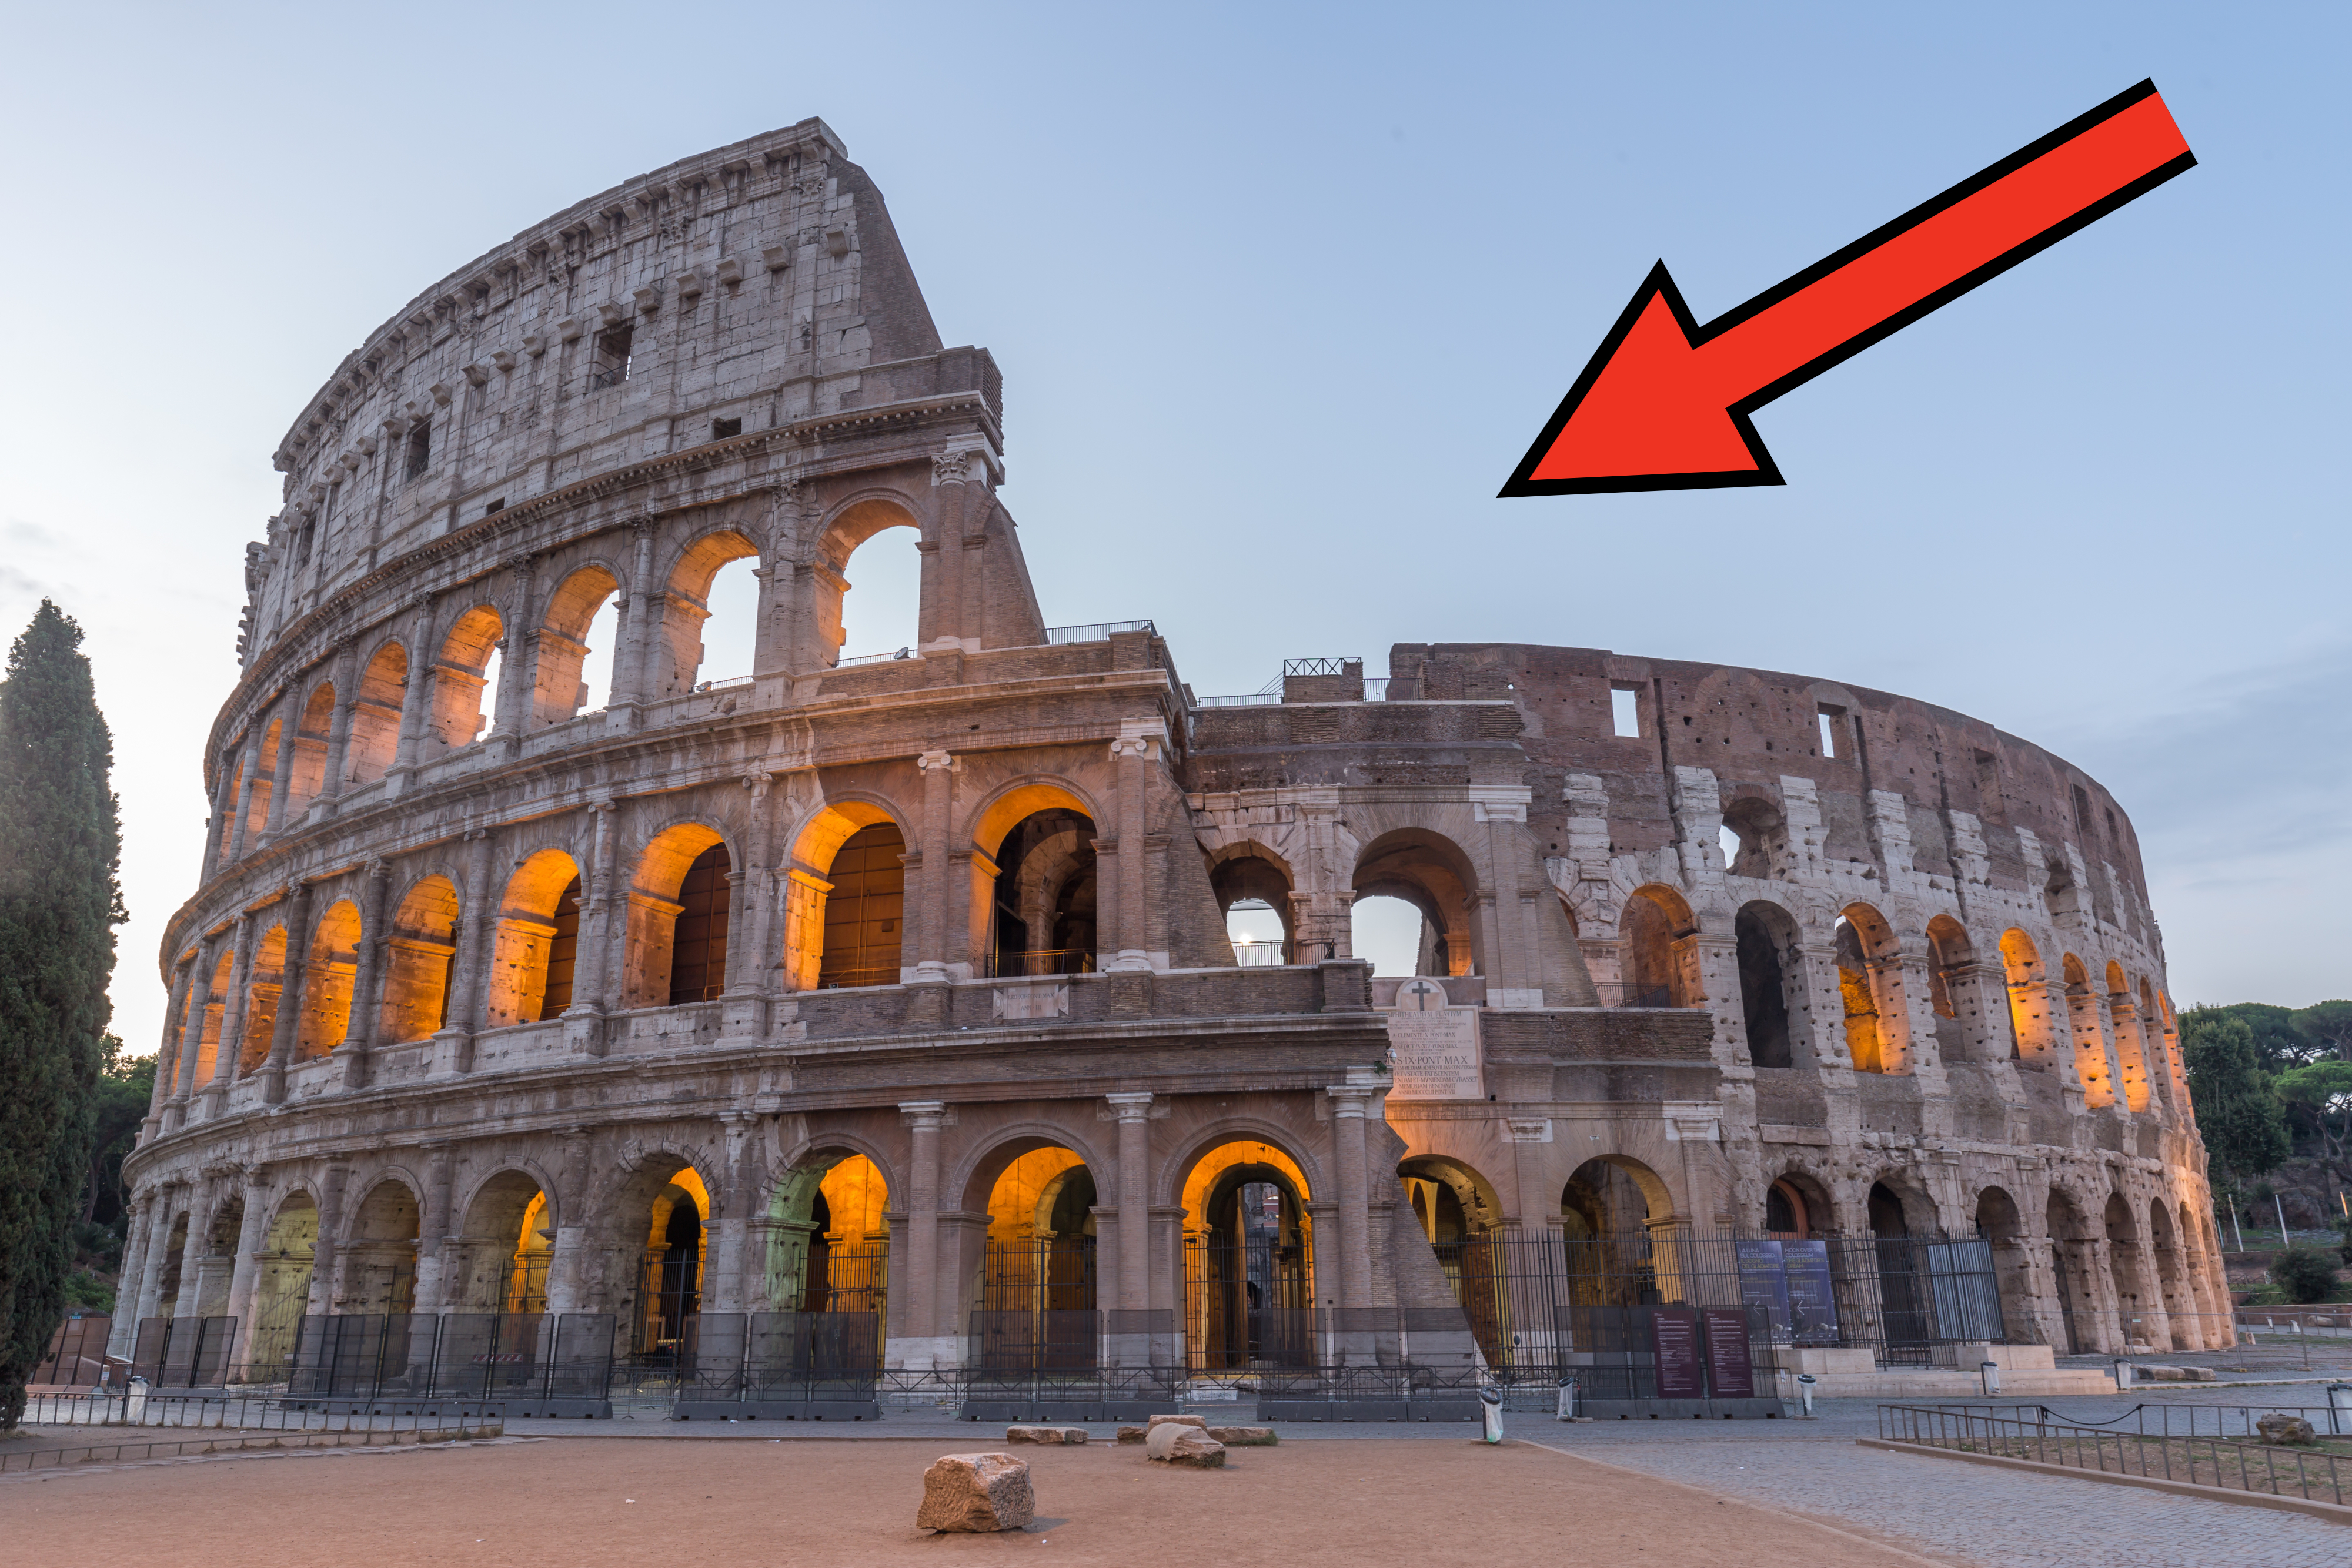 arrow pointing to the missing section in the colloseum today